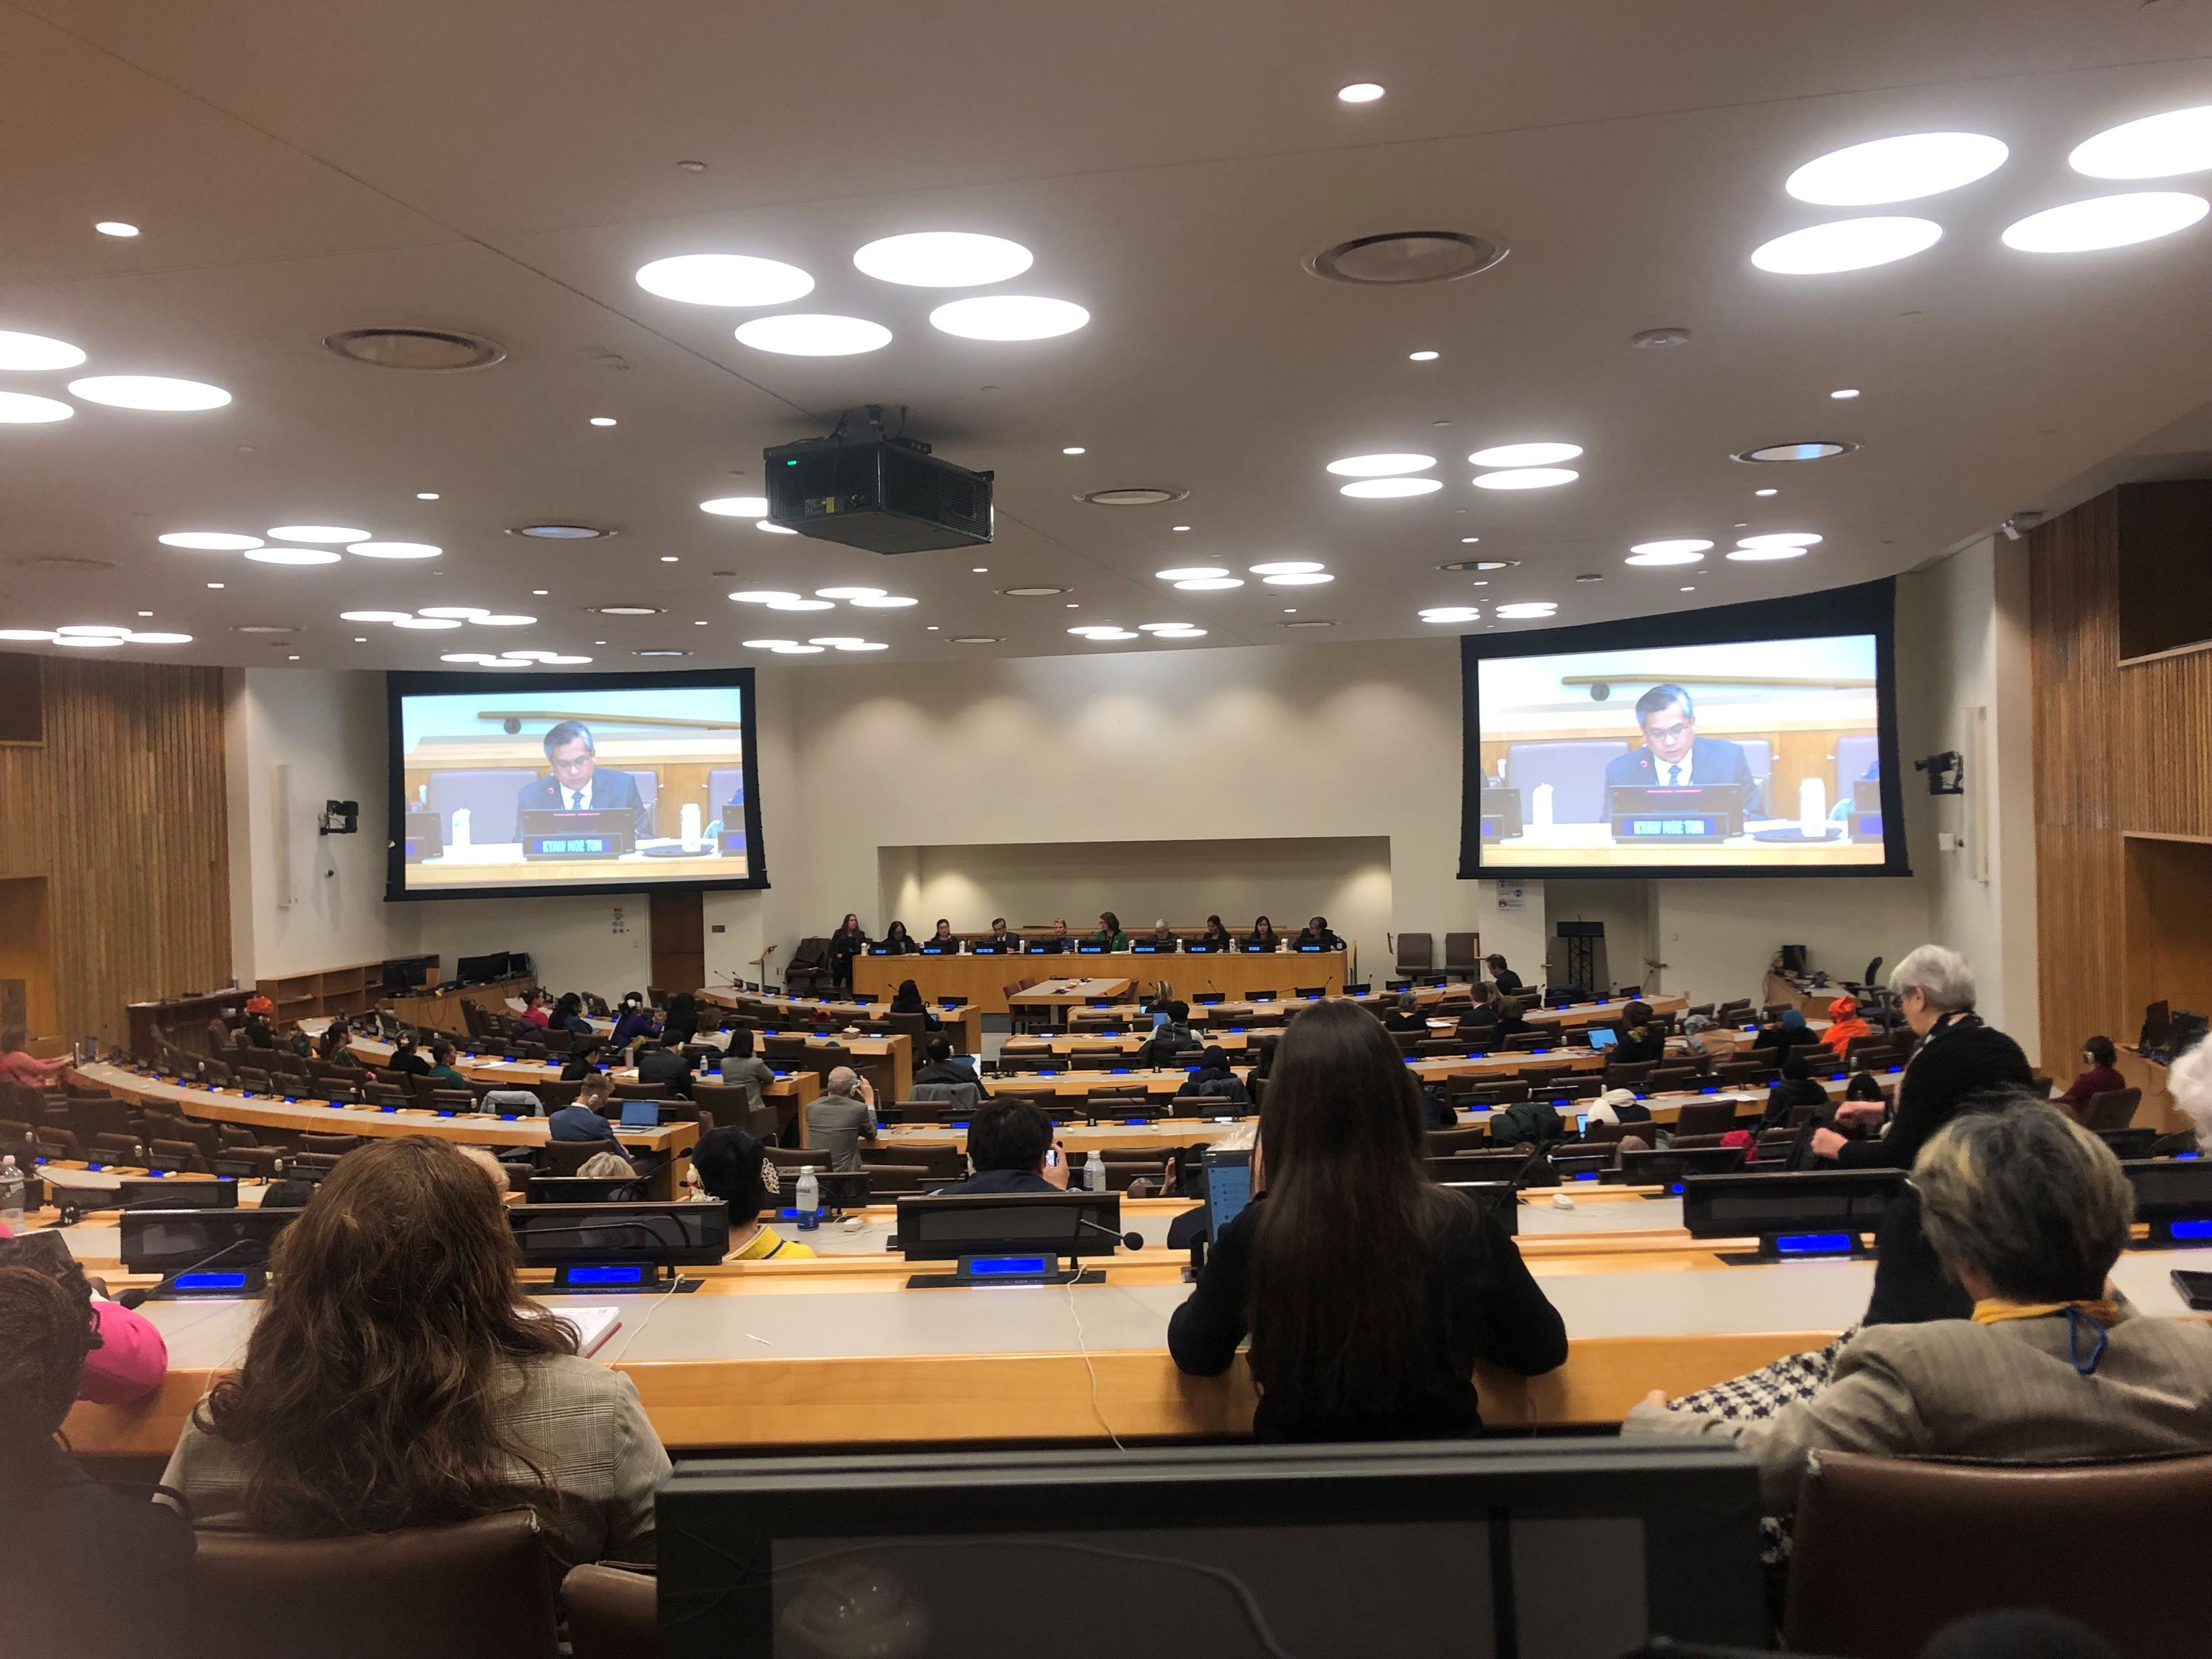 Photo of a CSW67 conference hall with participants